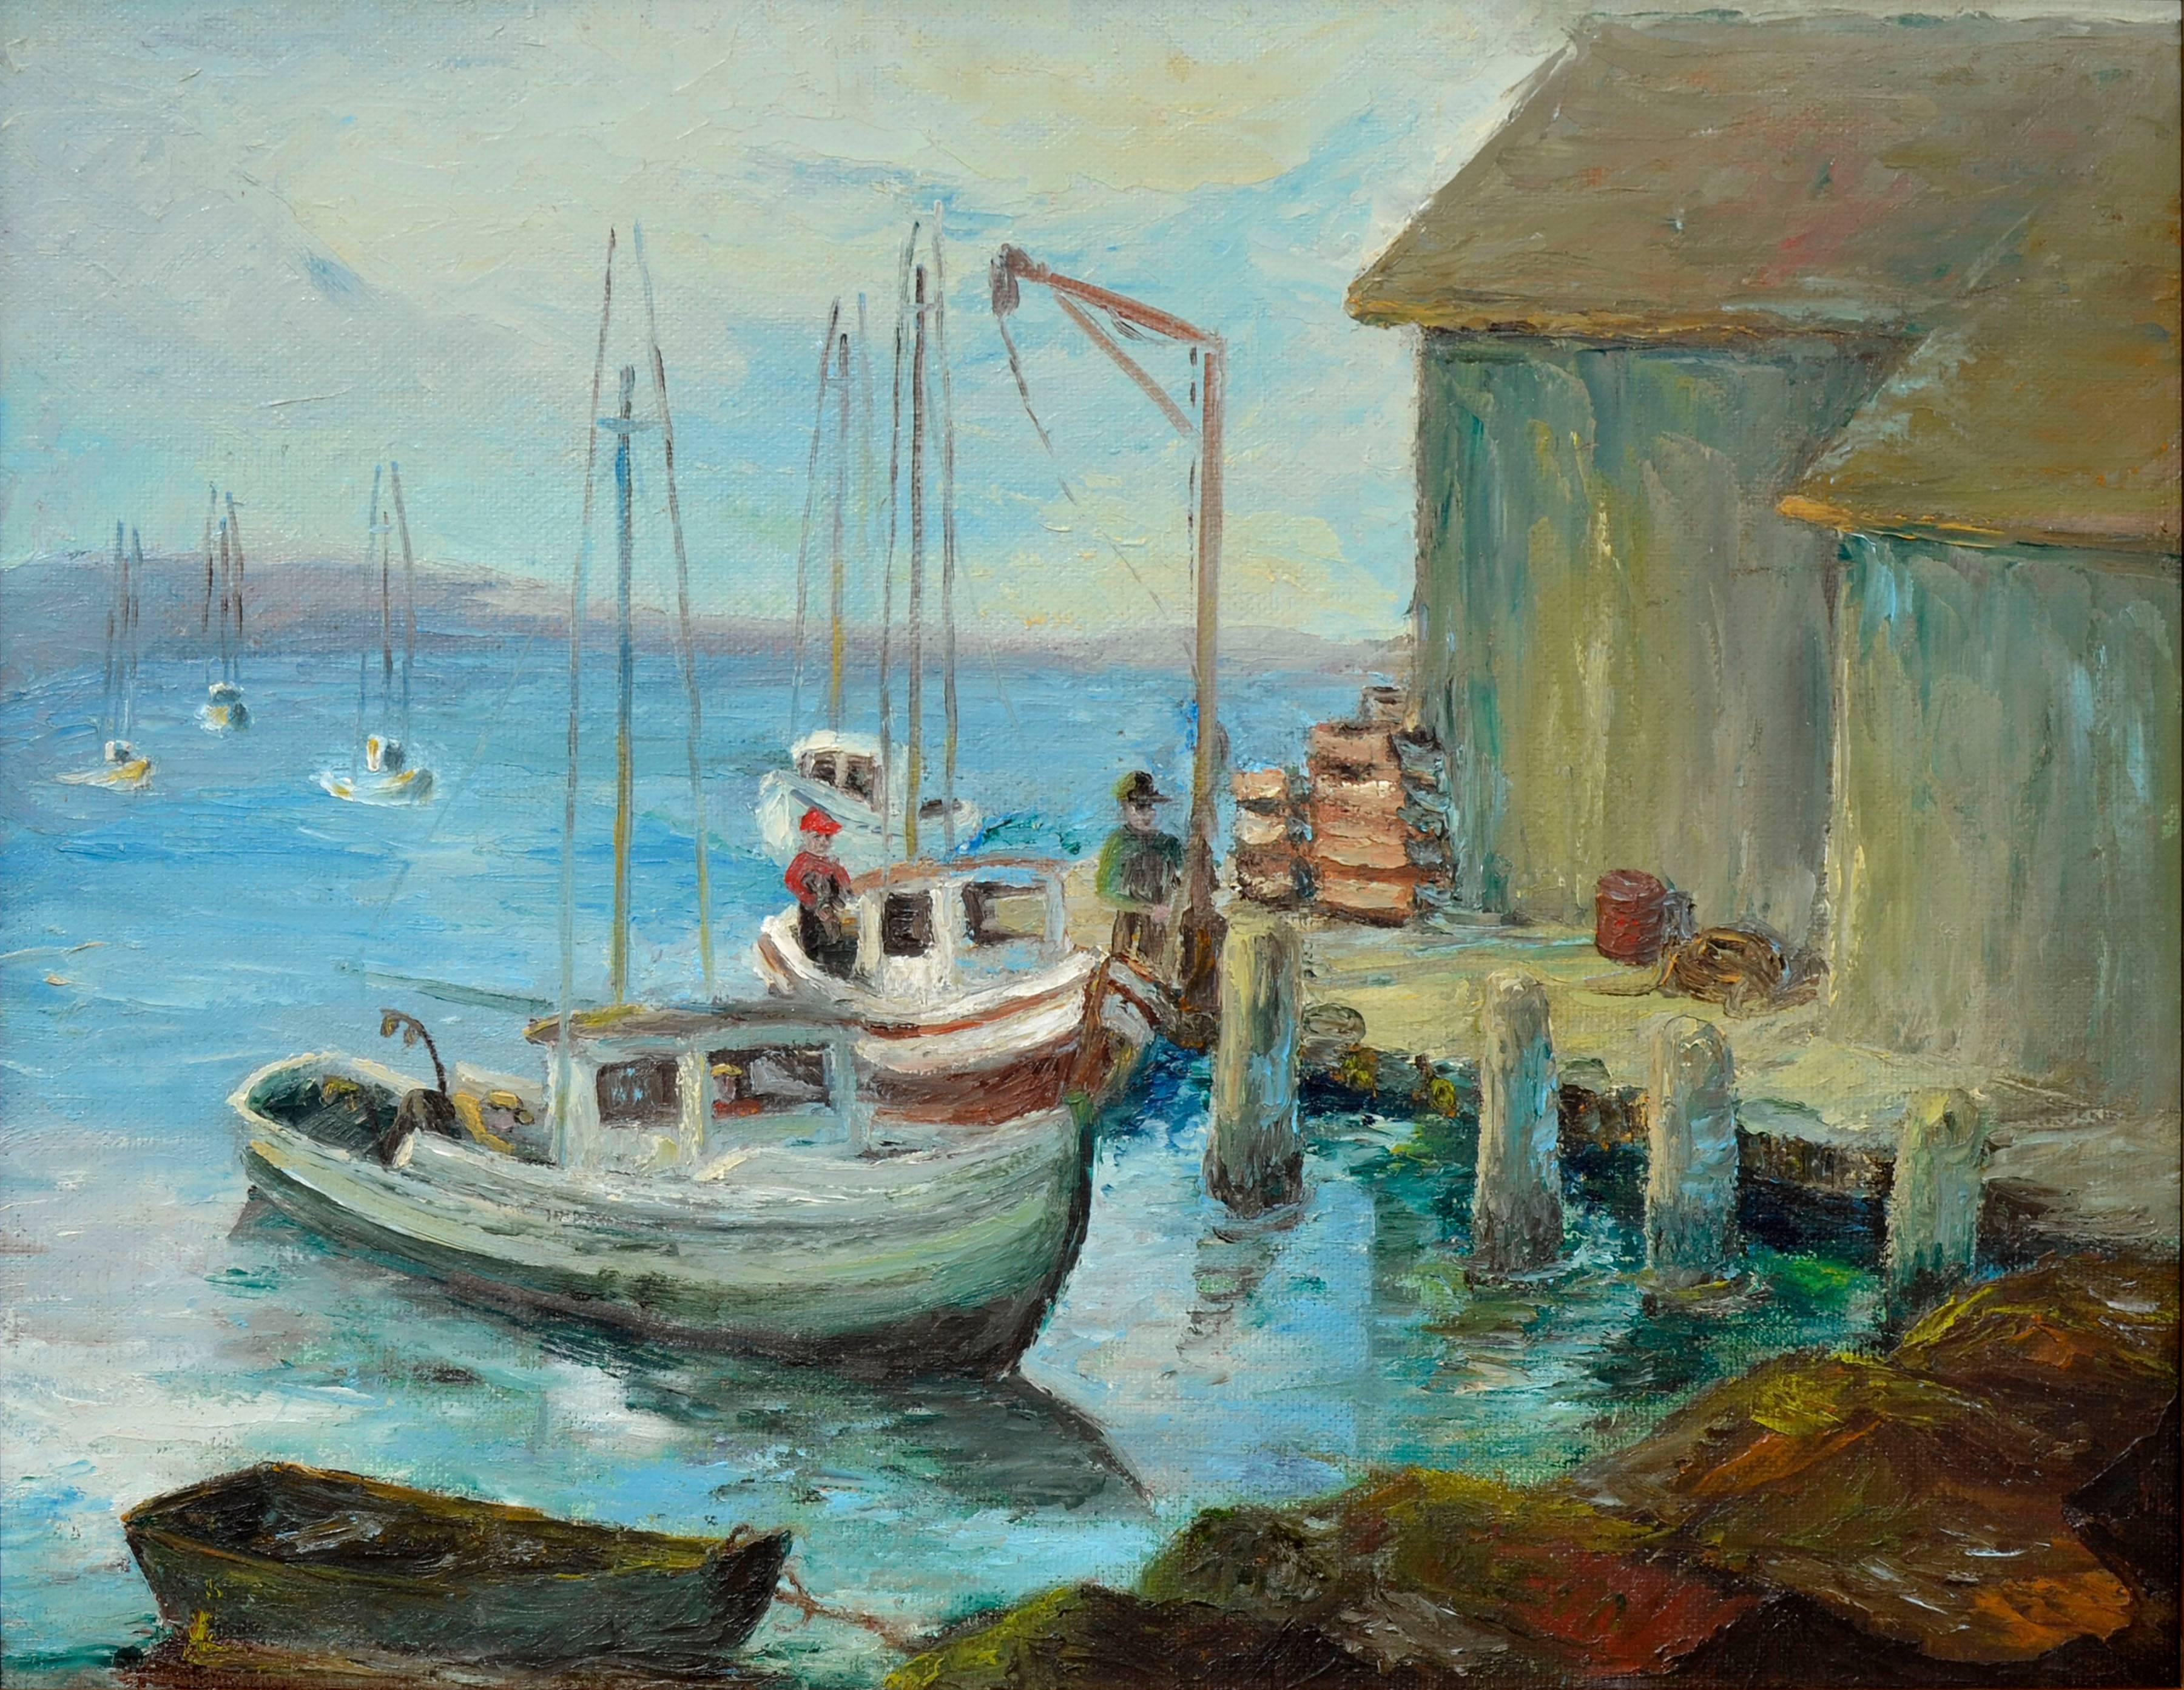 Fishermen at the Dock, Monterey - Mid Century Figurative Landscape  - Painting by Unknown